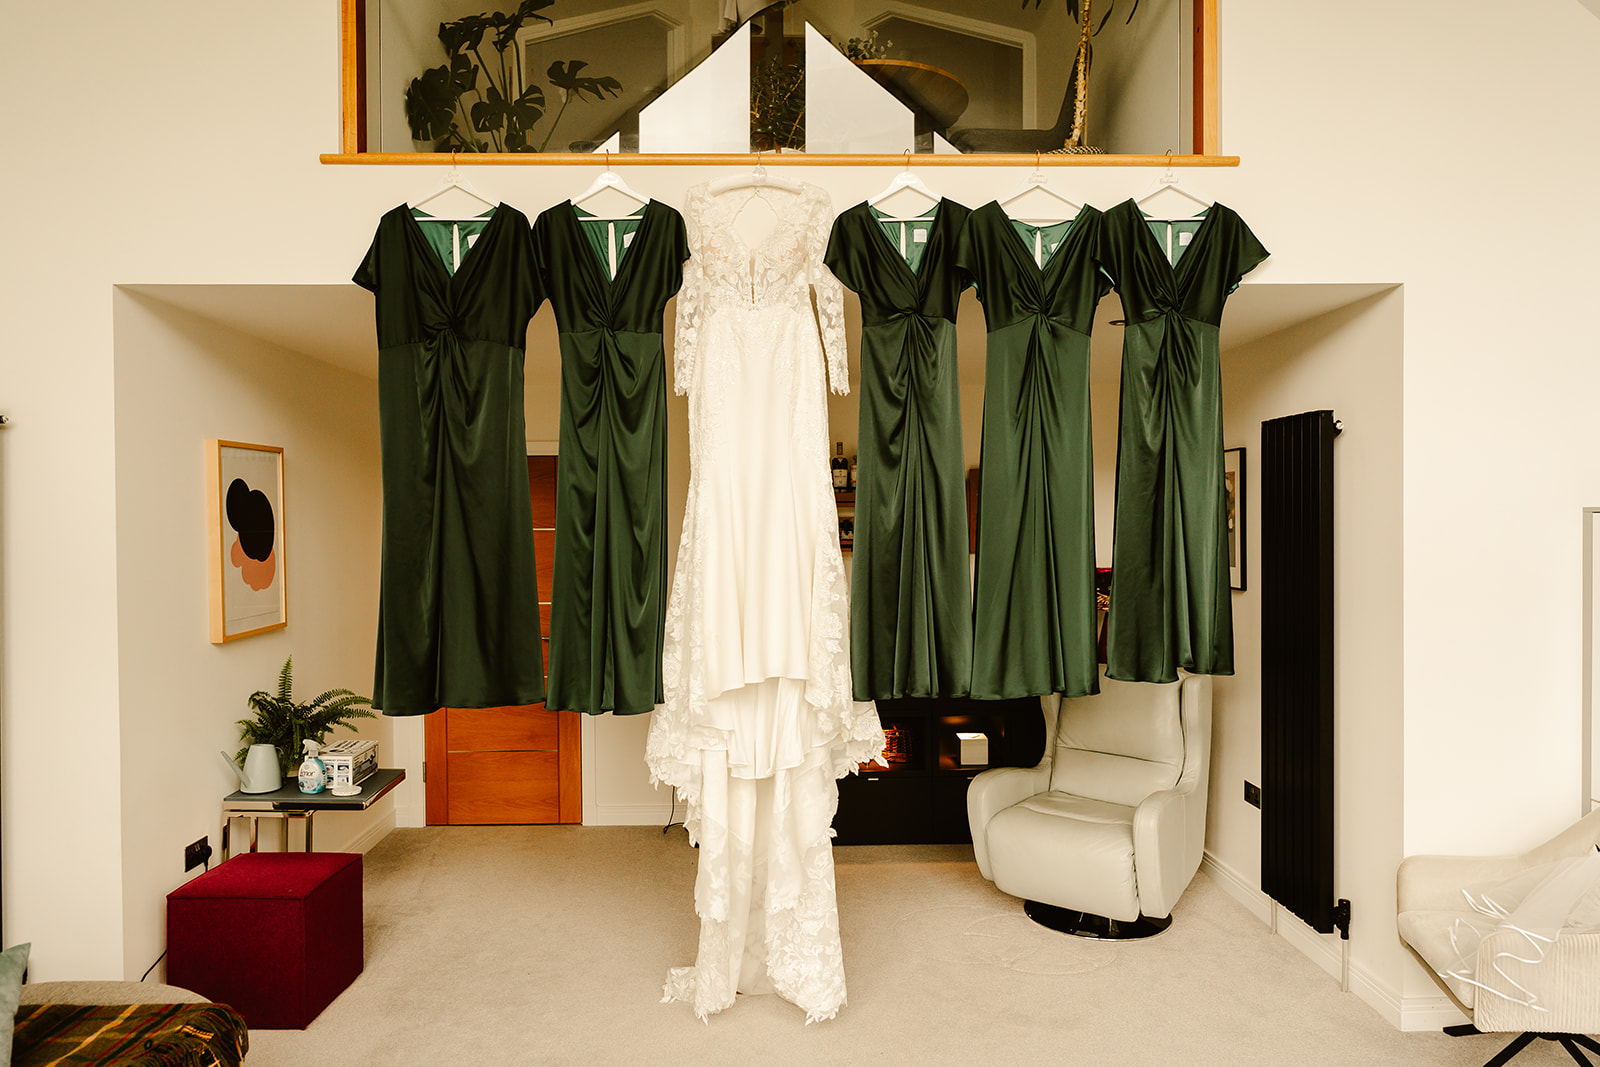 a wedding dress and five bridesmaids dresses hang from an indoor balcony on the morning of an aberdeen wedding